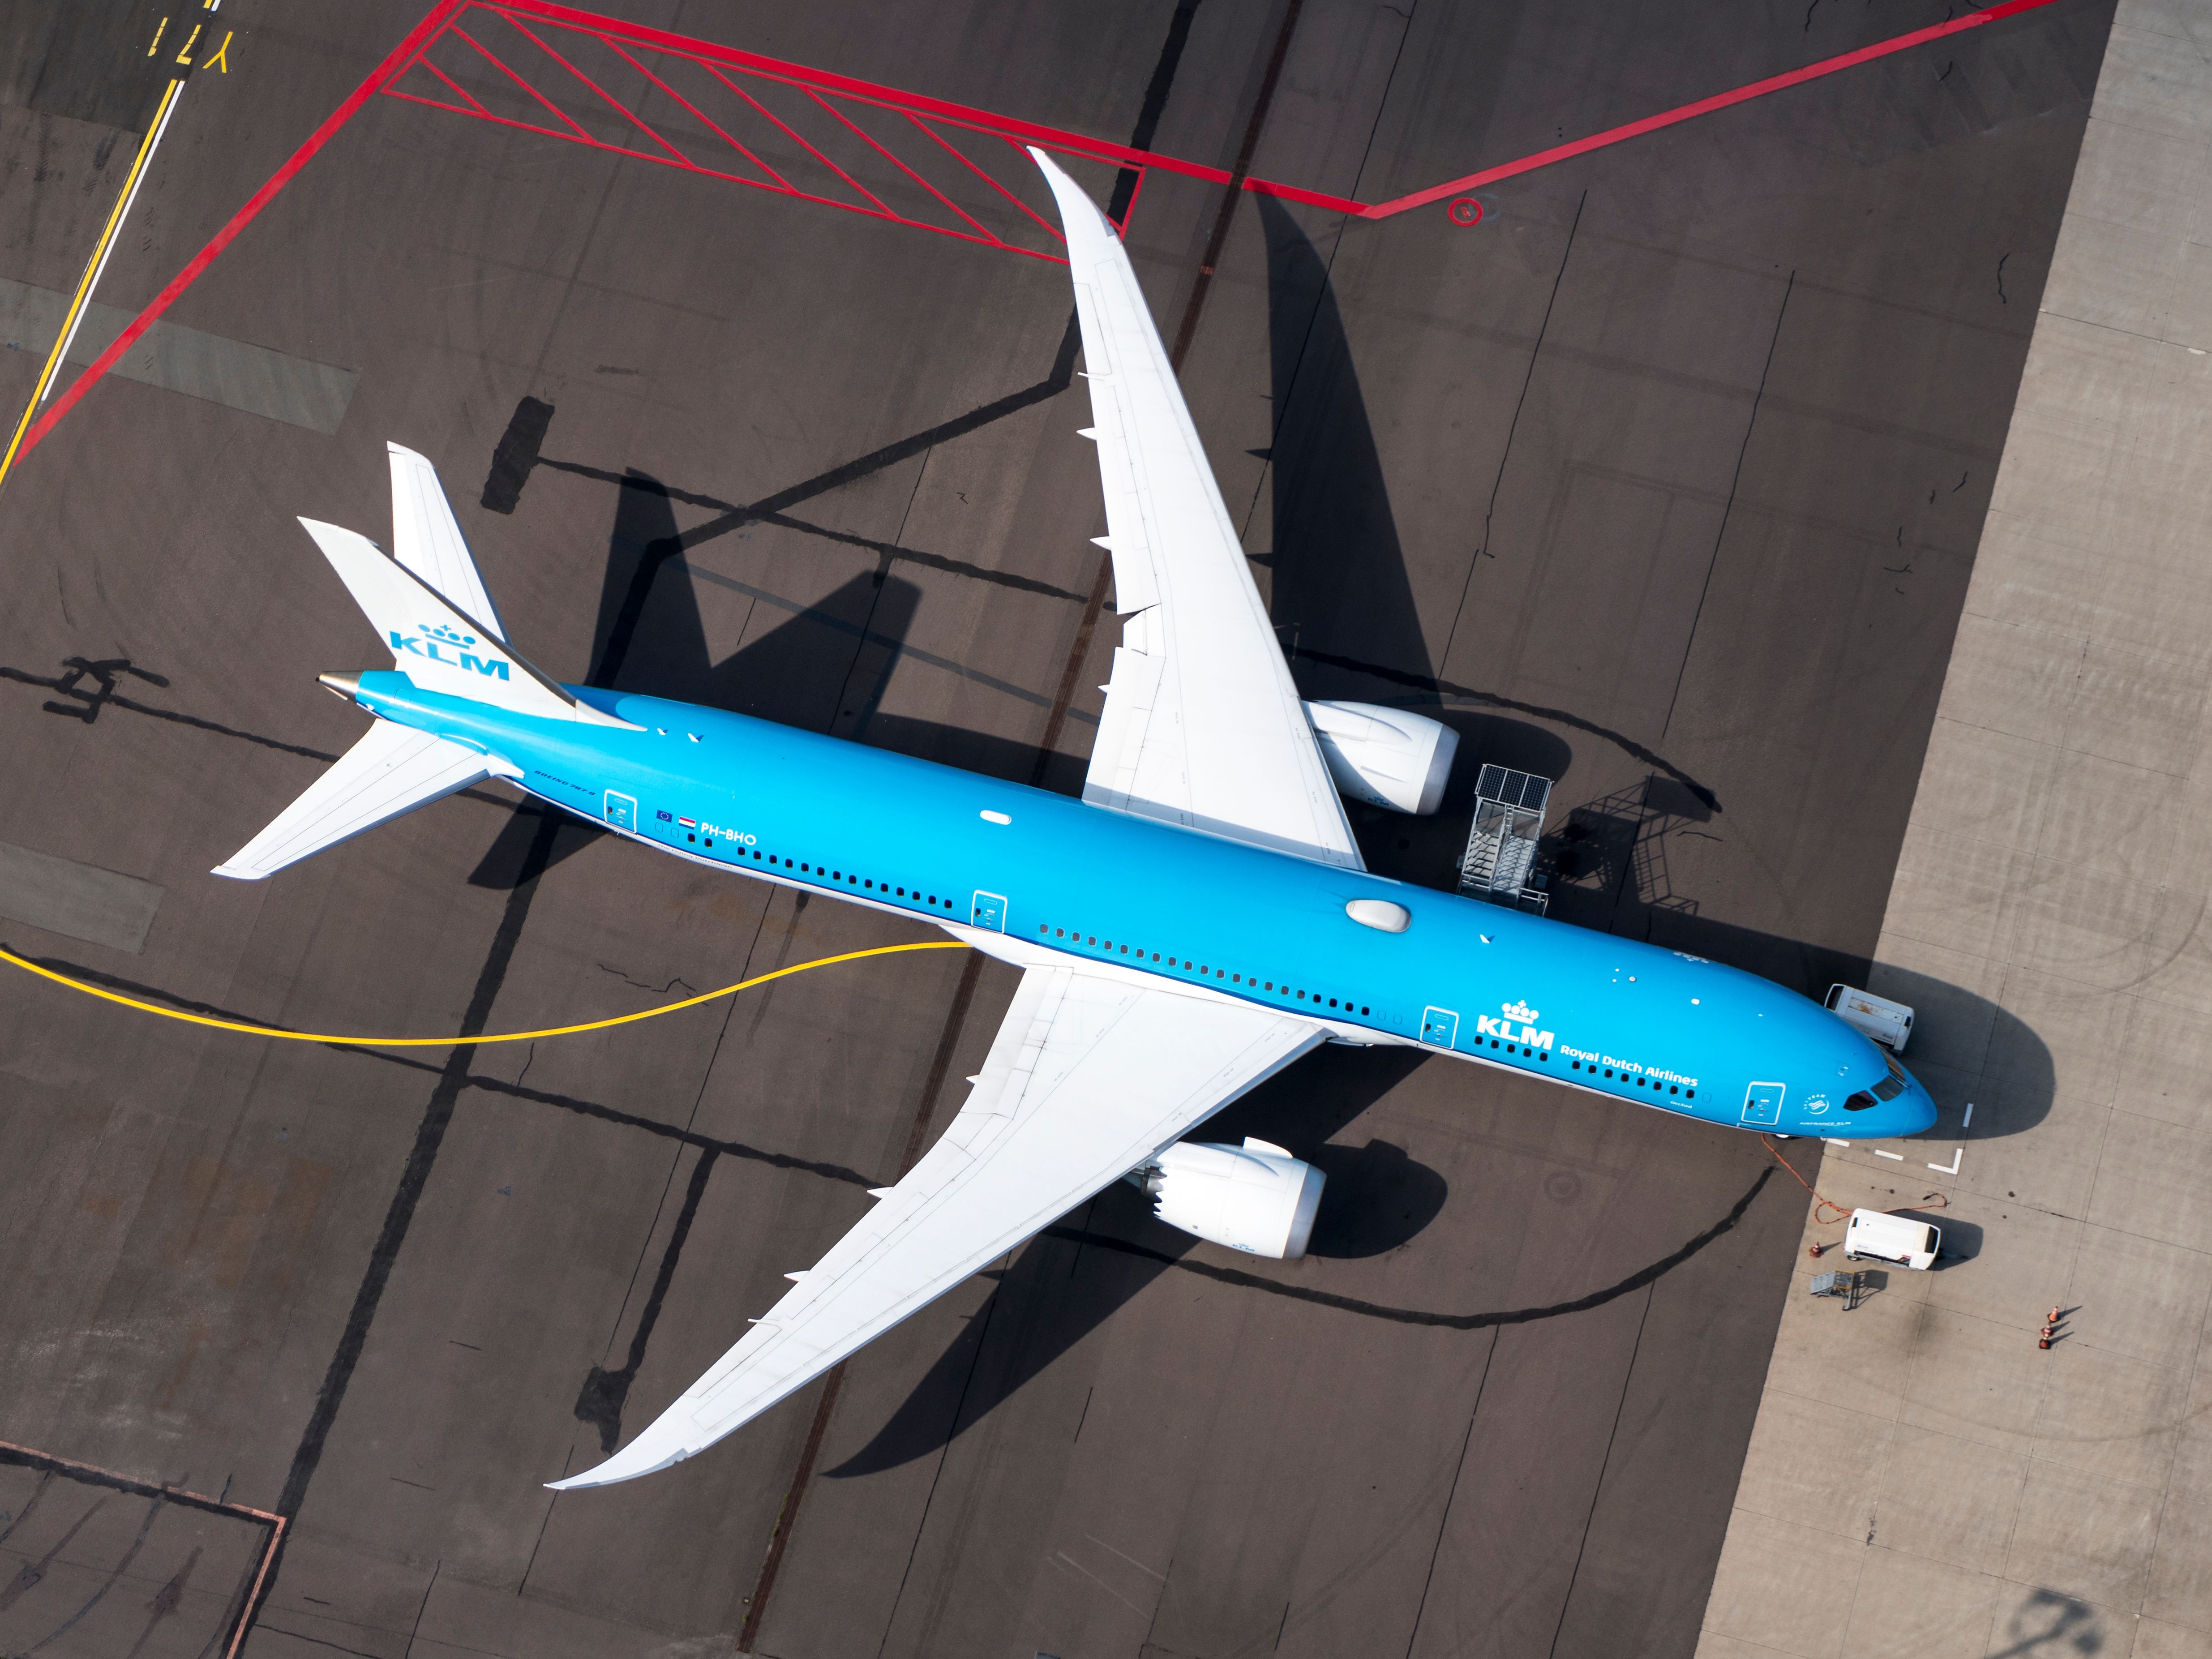 KLM aircraft from above